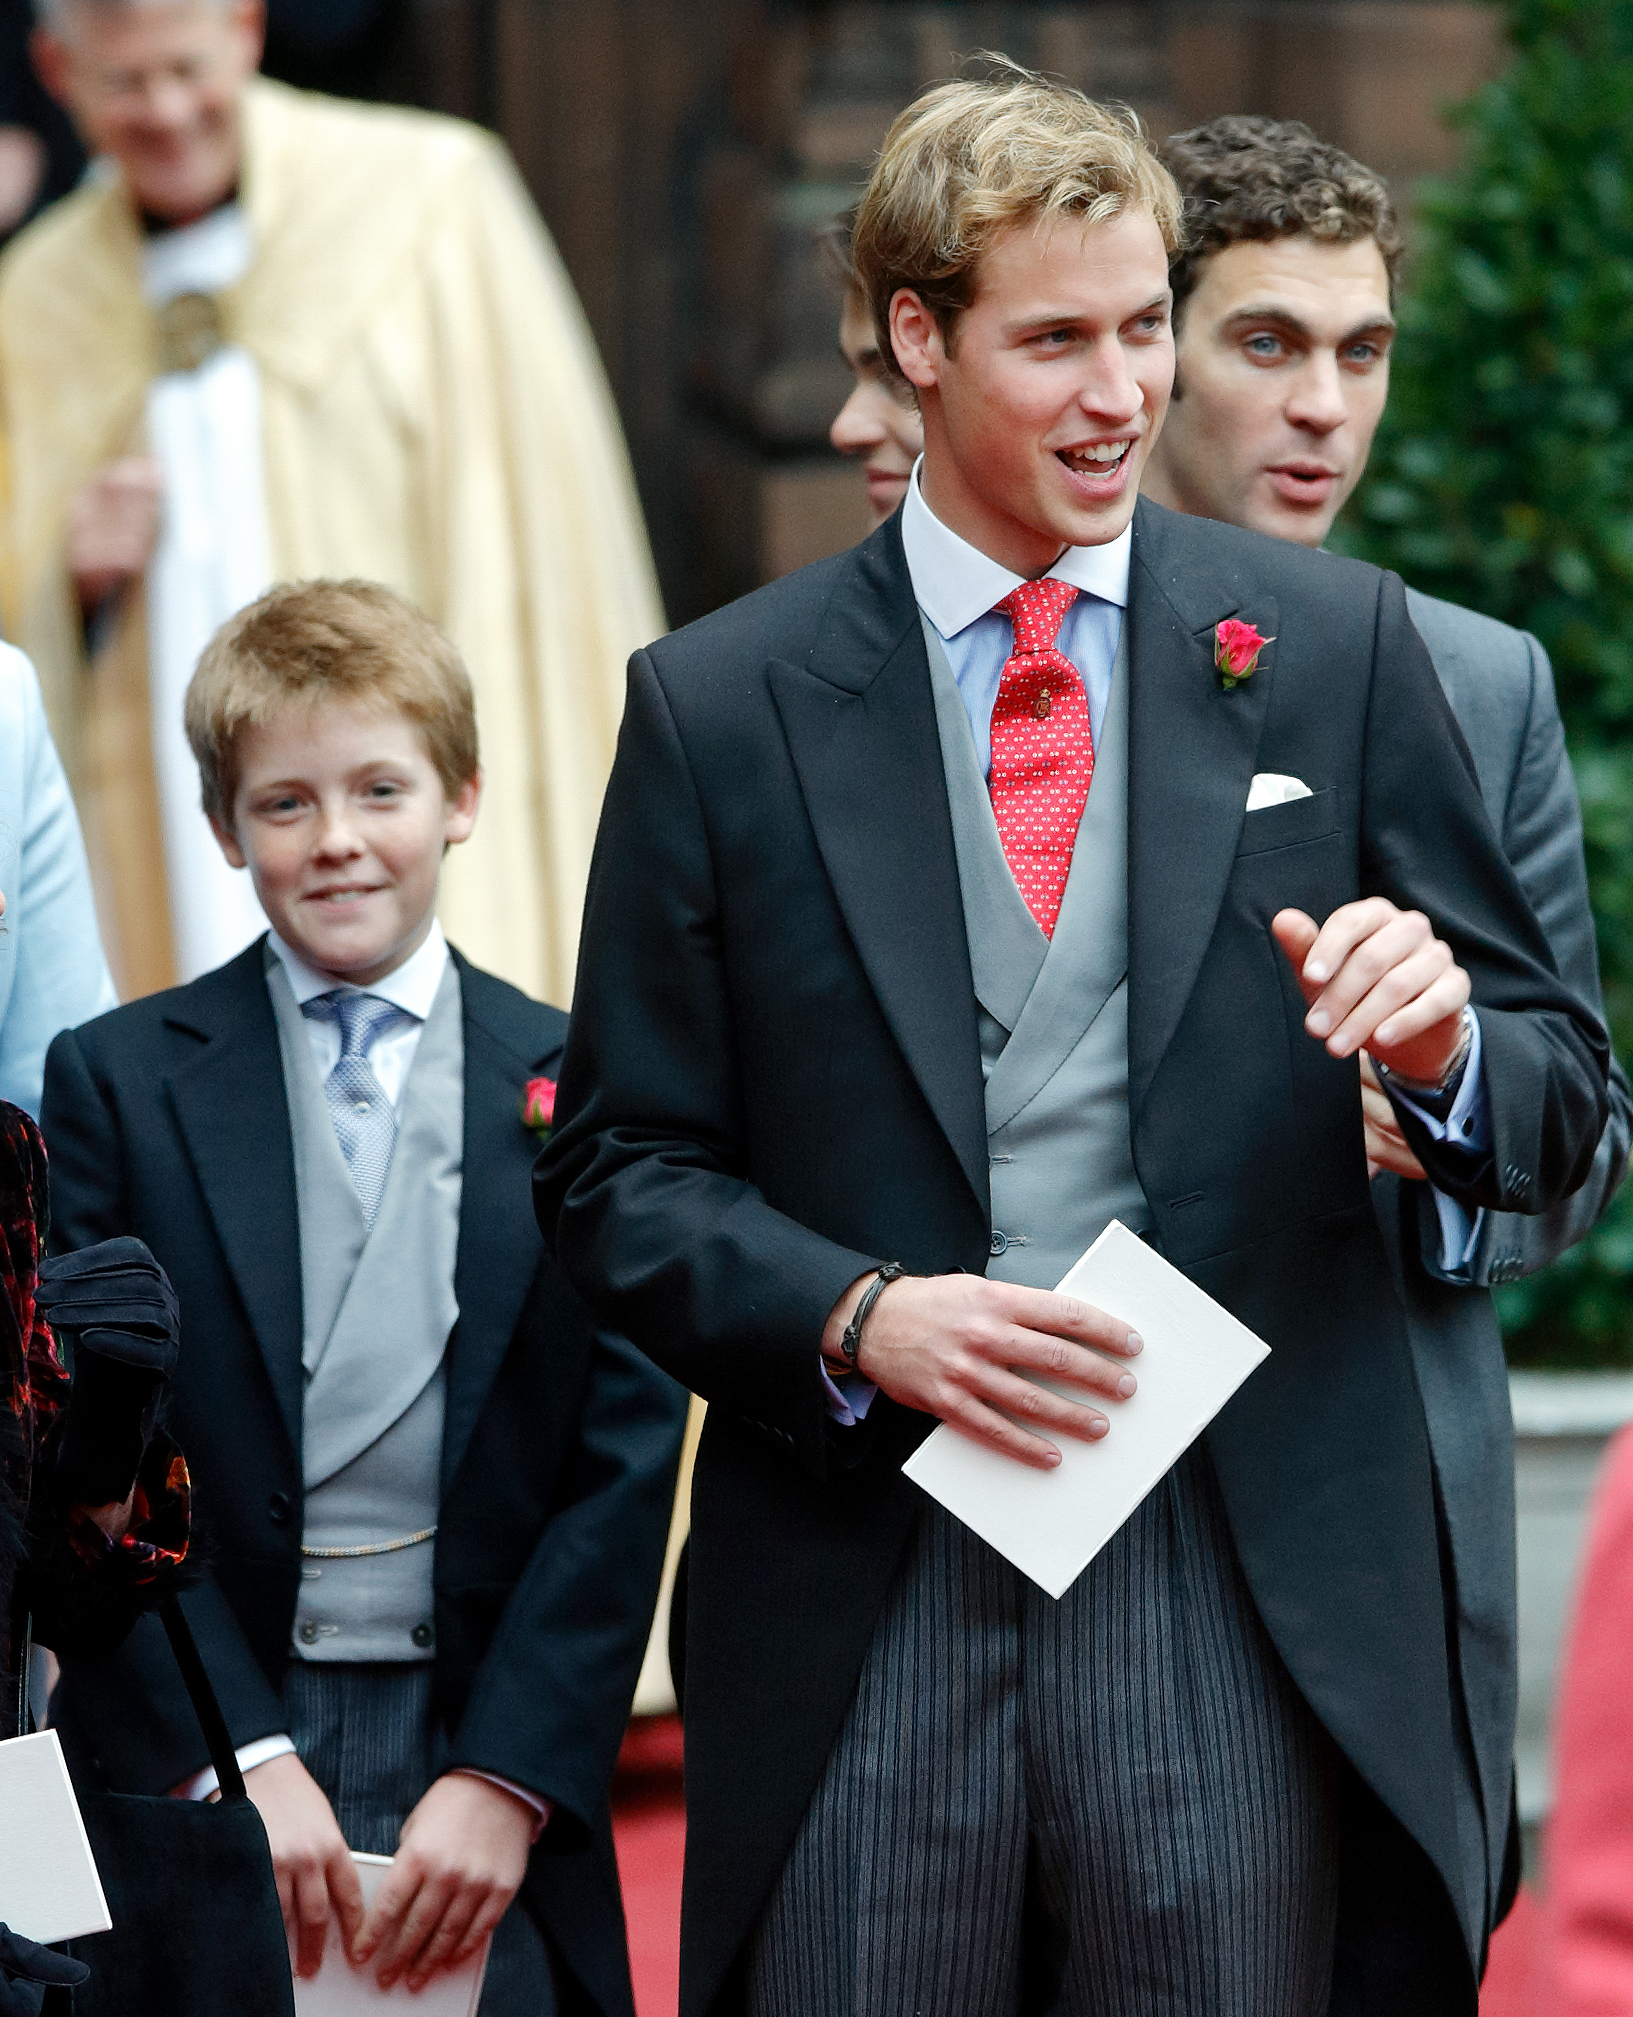 The Duke of Westminster, Hugh Grosvenor, and Prince William at the wedding of Edward van Cutsem and Lady Tamara Grosvenor in Chester, England on November 6, 2004 | Source: Getty Images